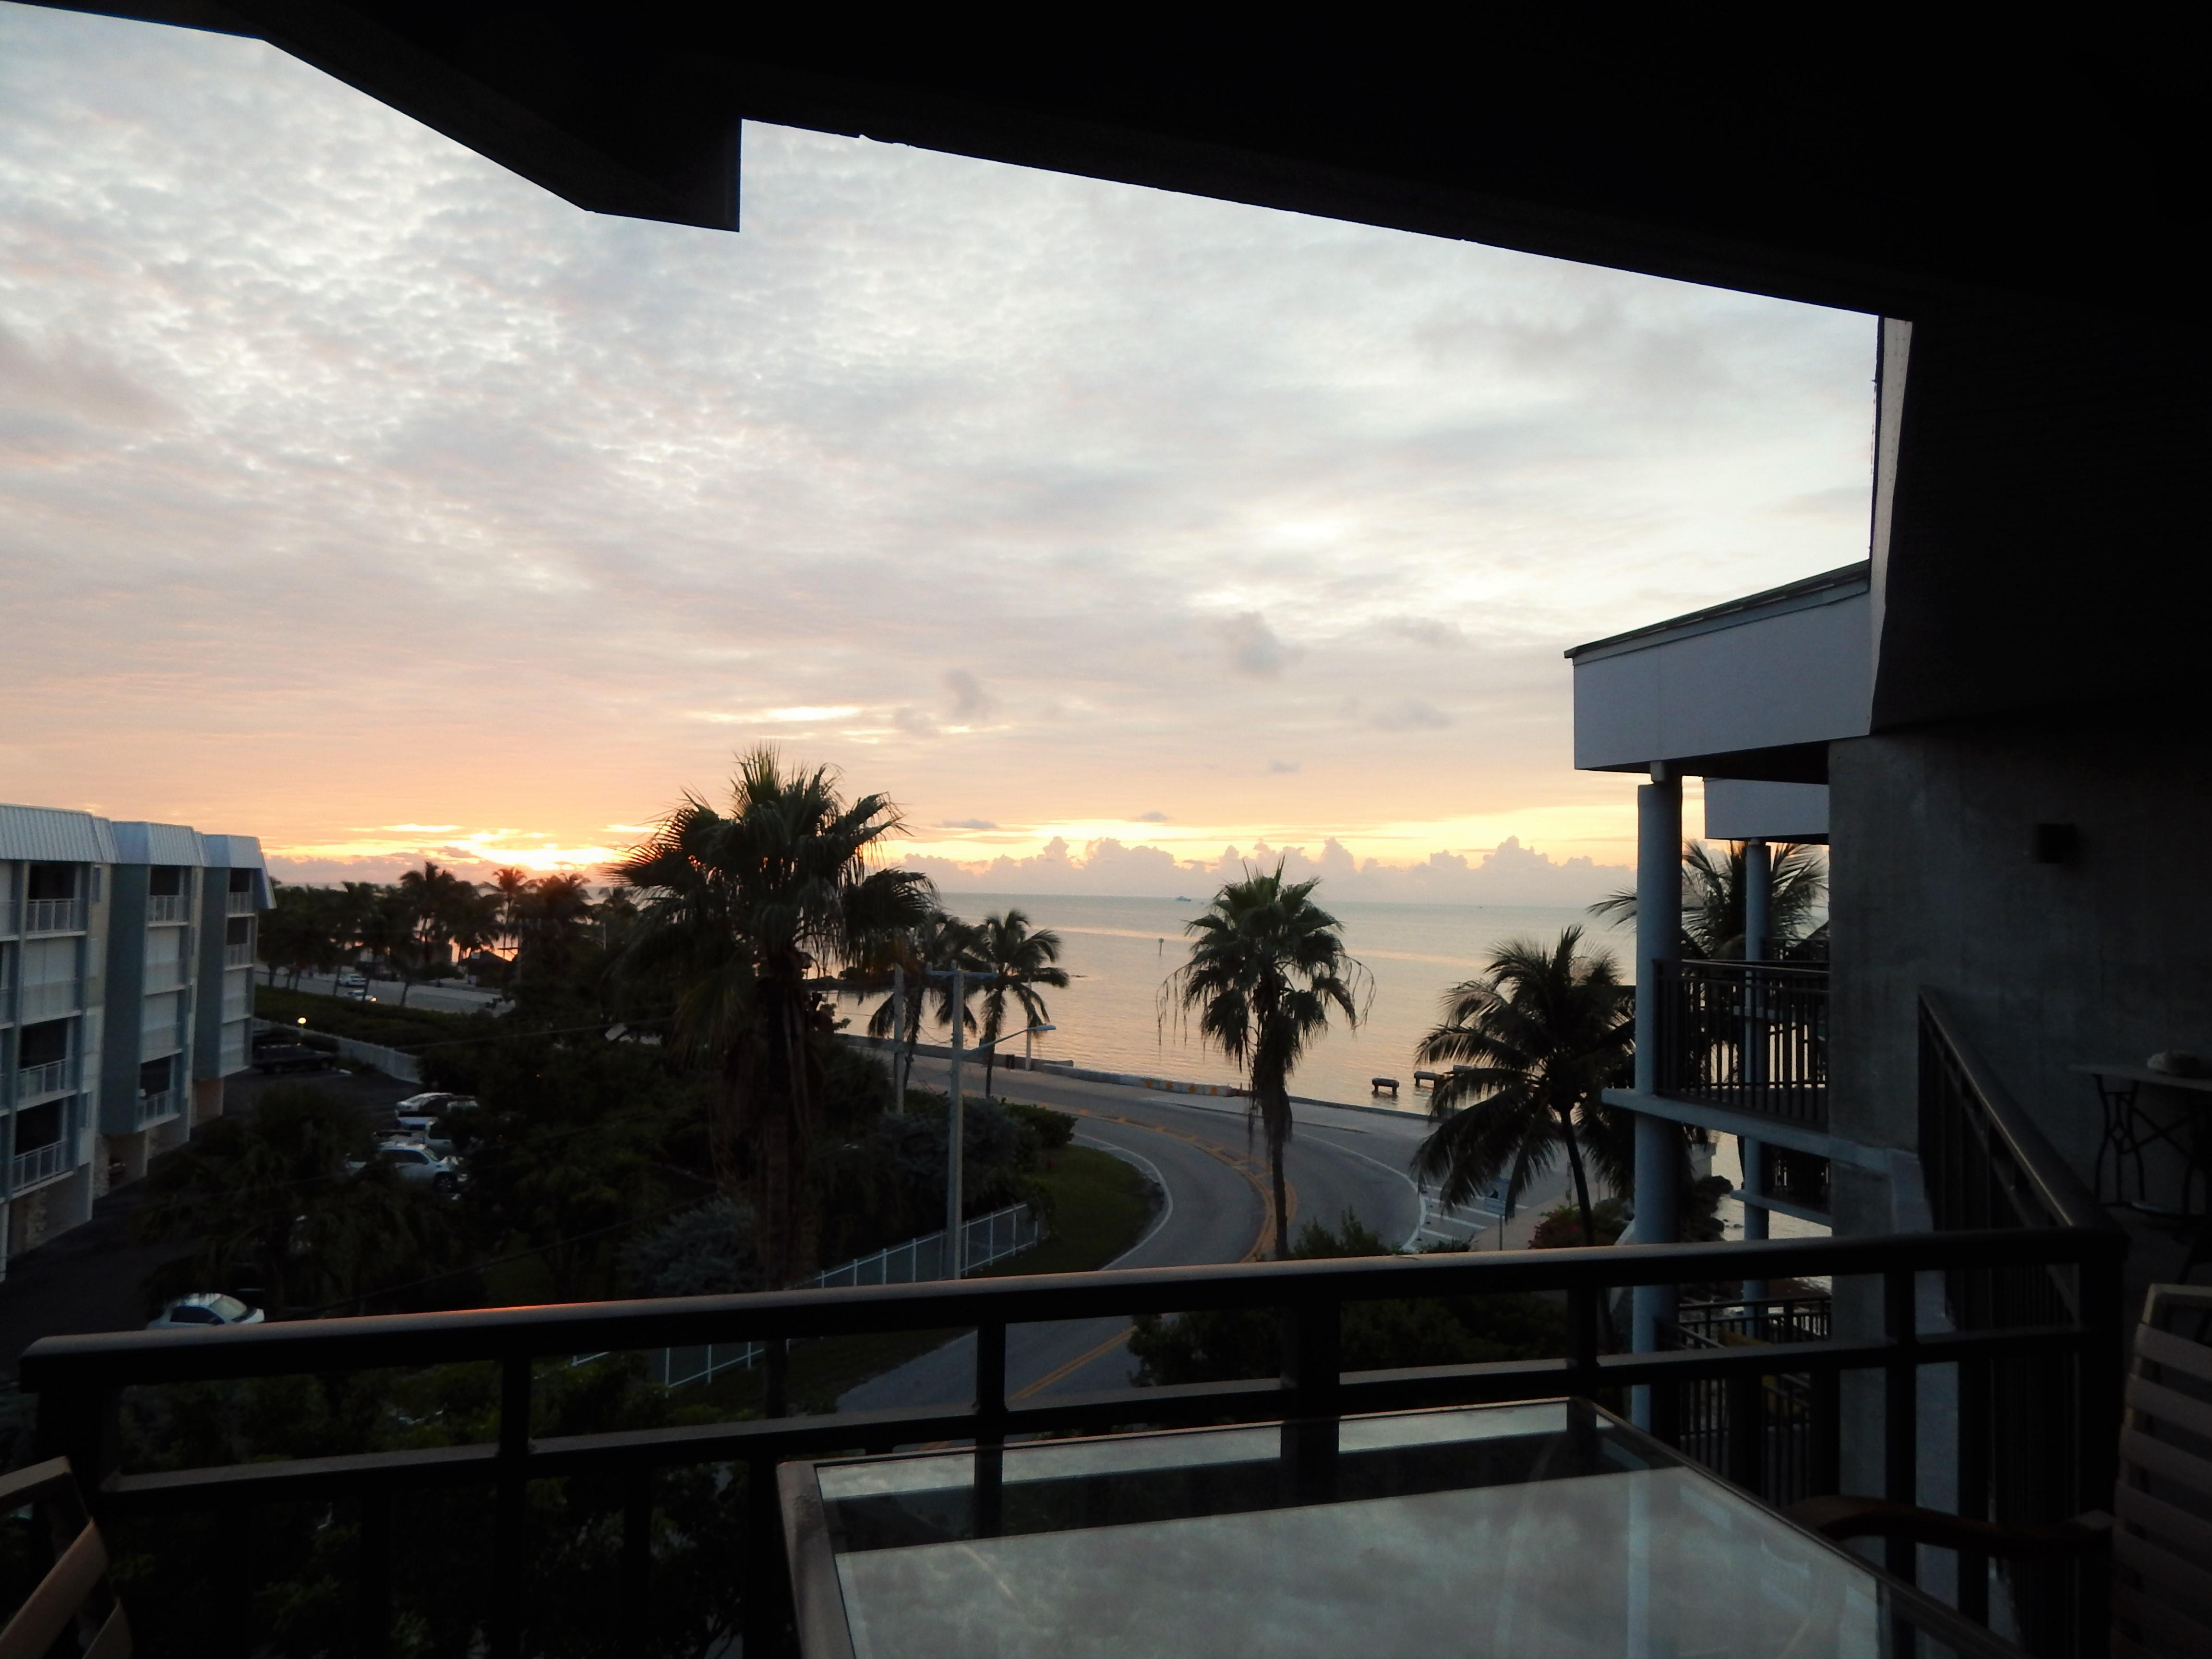 Sunrise view from your private balcony